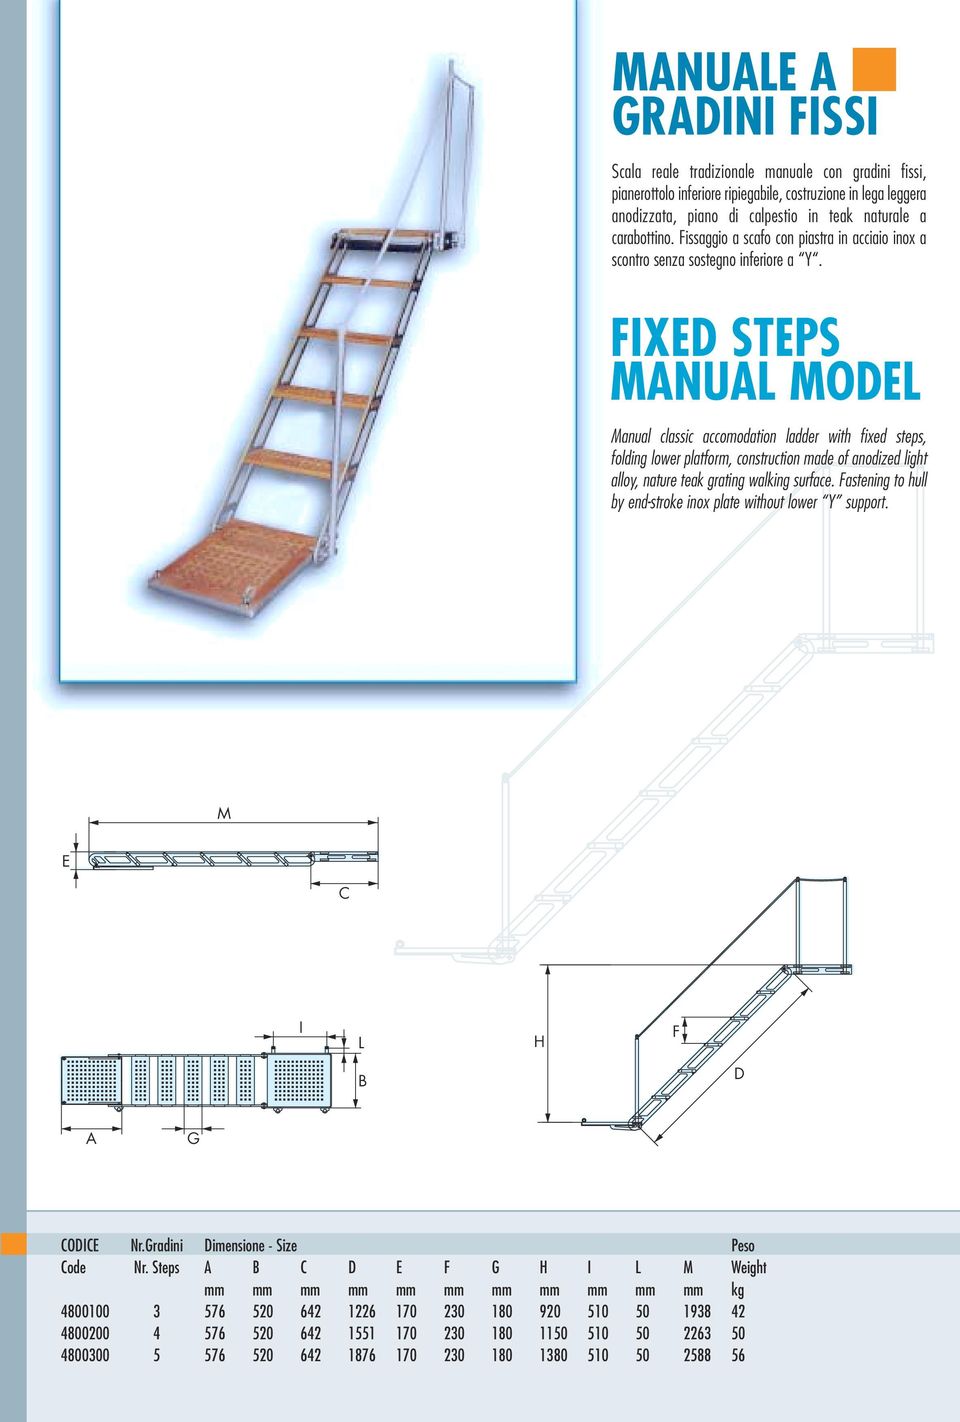 IXD STPS MANUAL MODL Manual classic accomodation ladder with fixed steps, folding lower platform, construction made of anodized light alloy, nature teak grating walking surface.